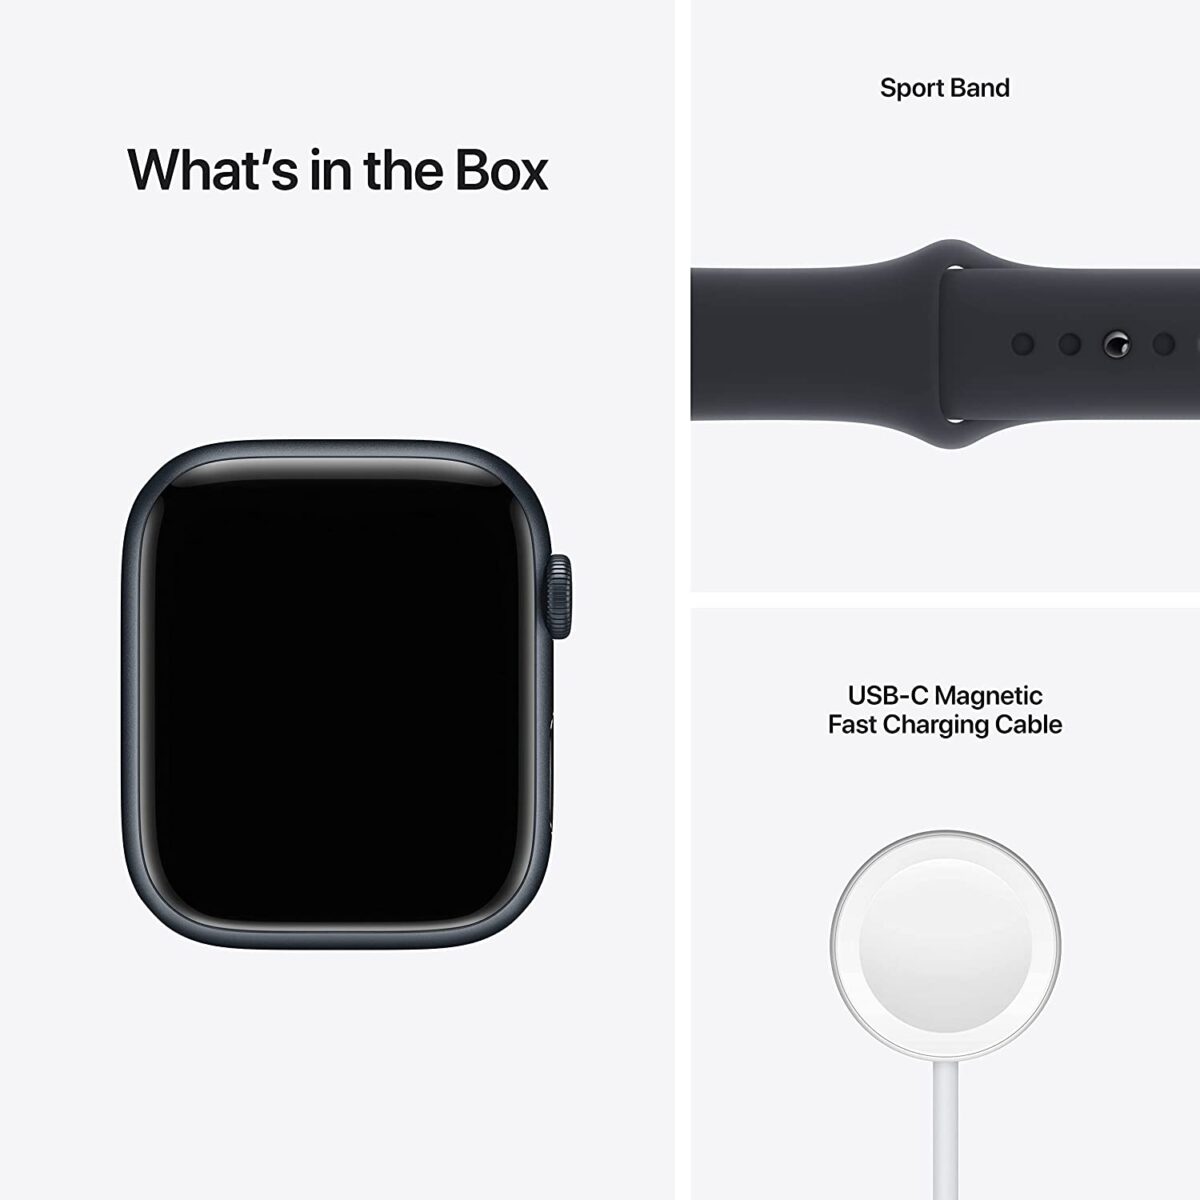 Apple Watch Series 7 includes Sport Band and Magnetic Charger